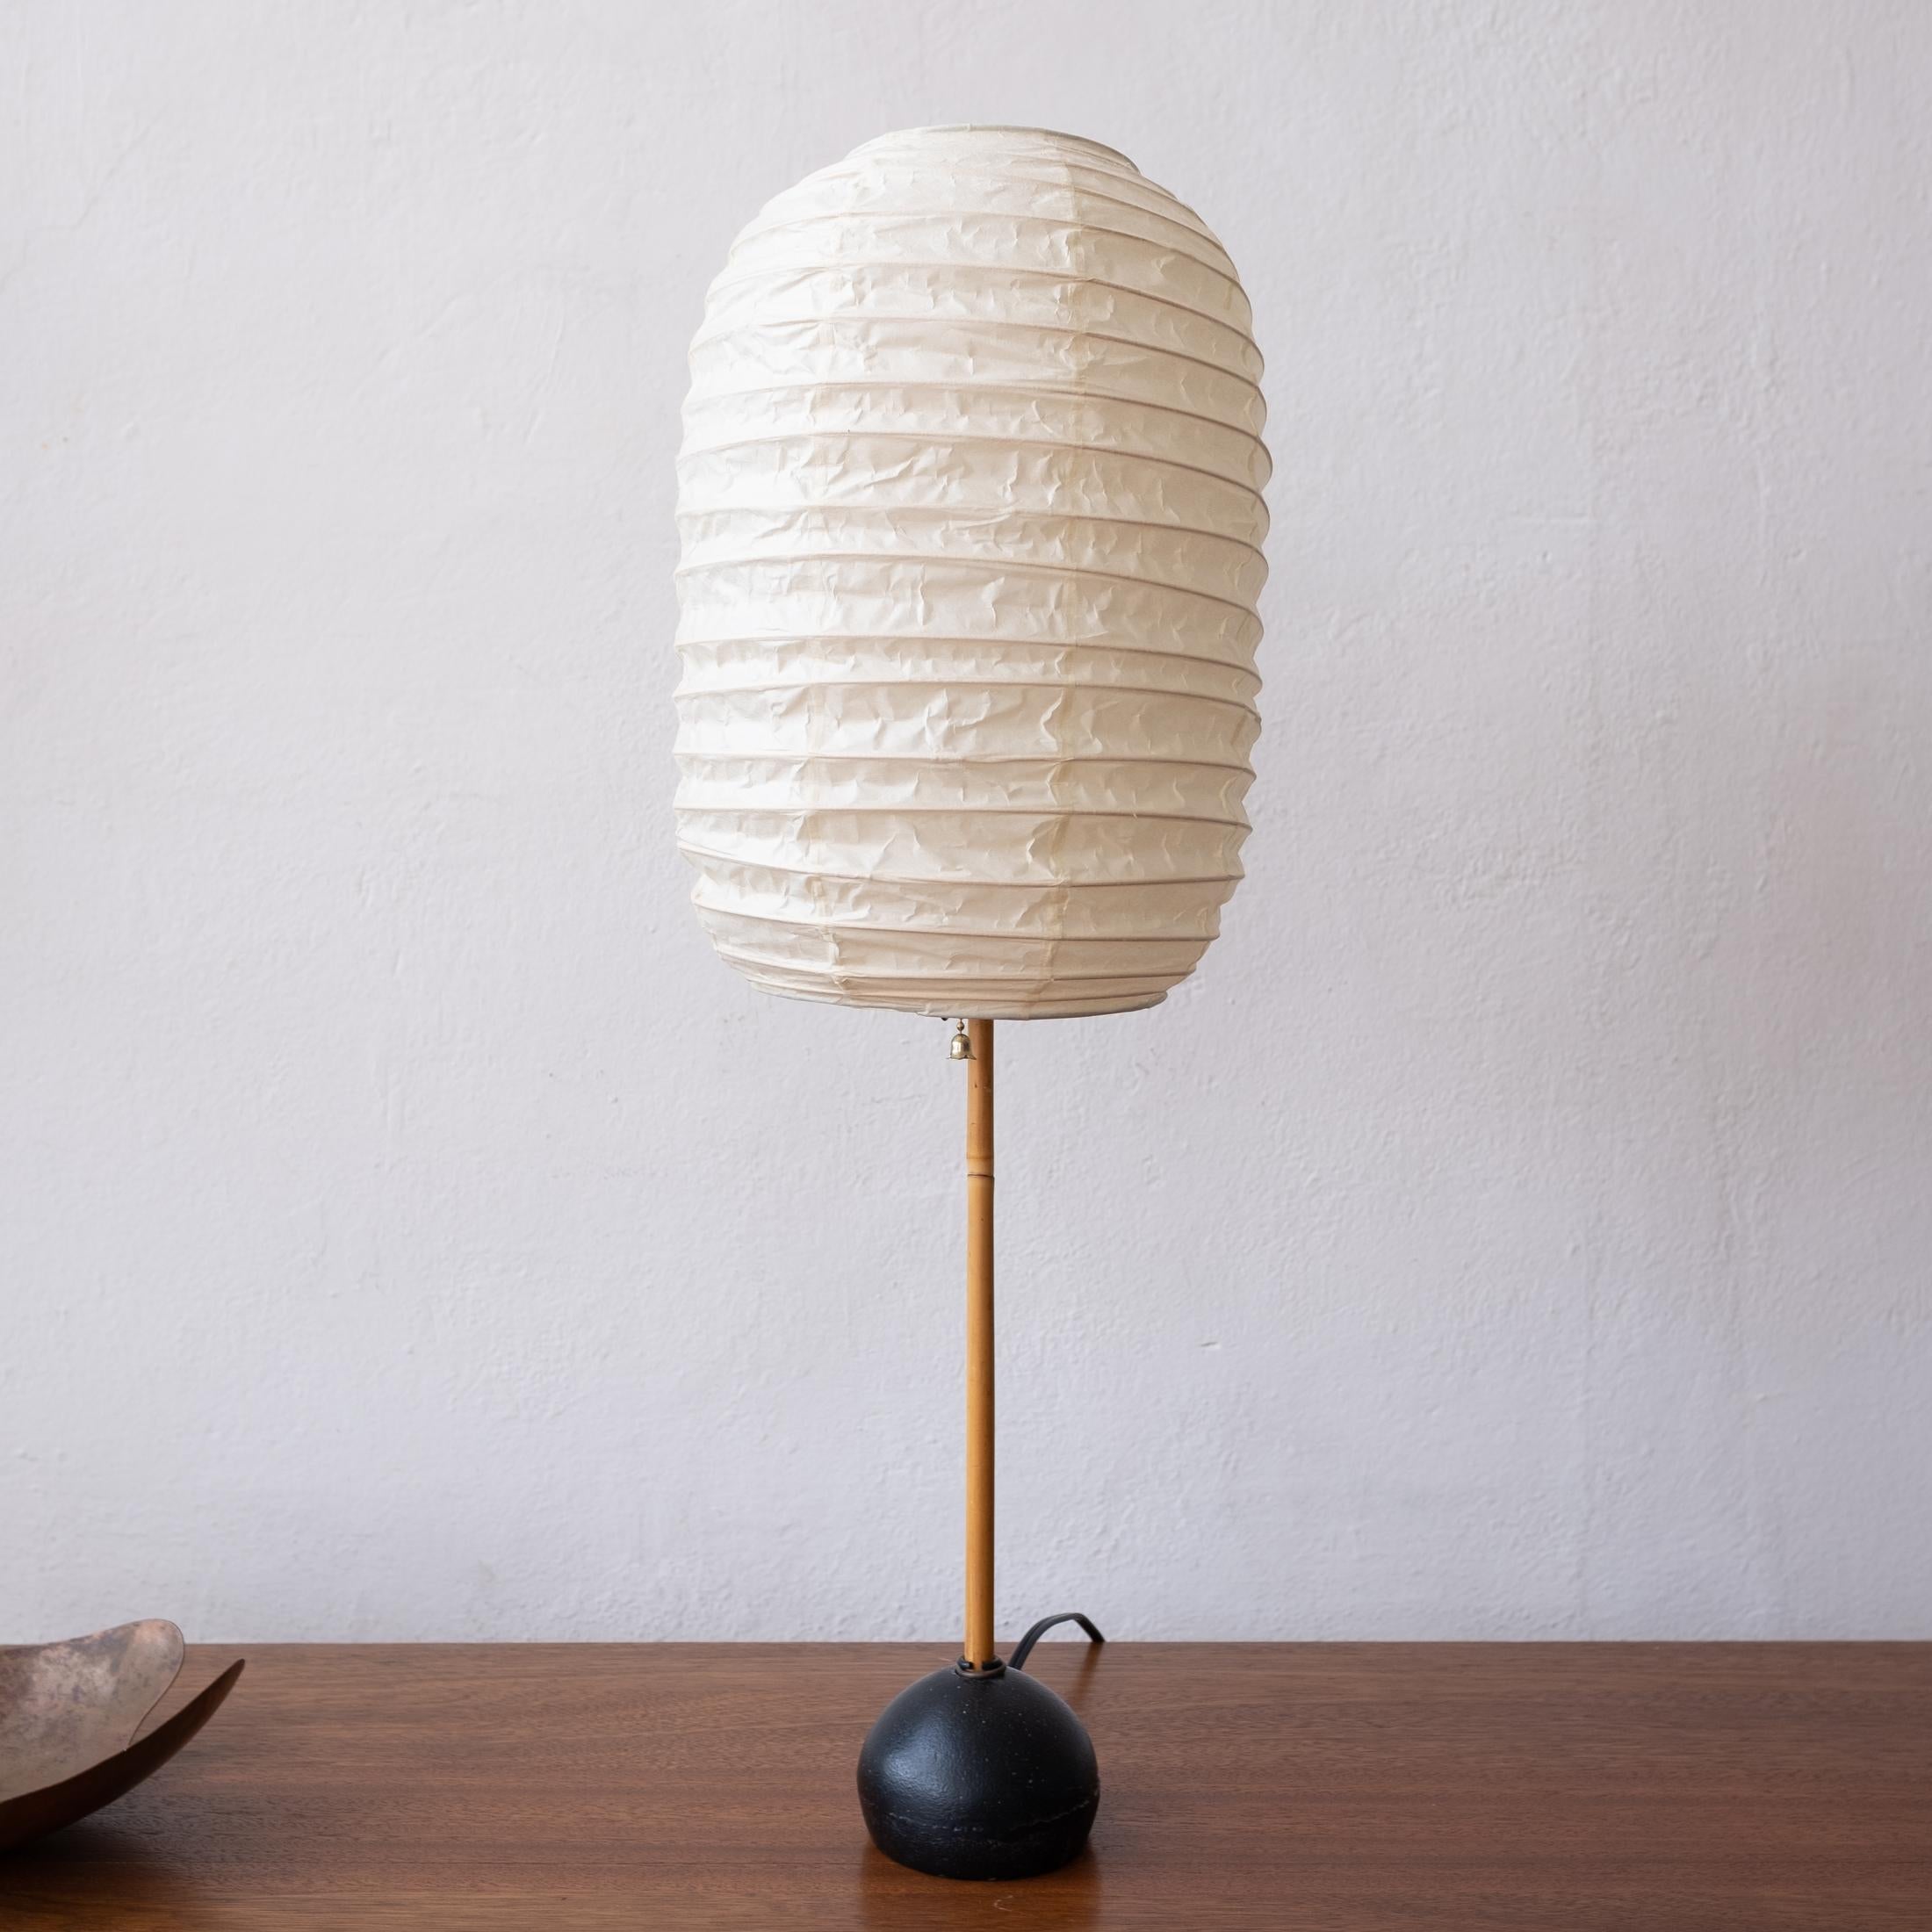 Isamu Noguchi Akari table lamp from the 1960s. Bamboo pole and iron rock form base. The paper shade has been replaced at some point with a genuine Noguchi signed shade. Made in Japan.